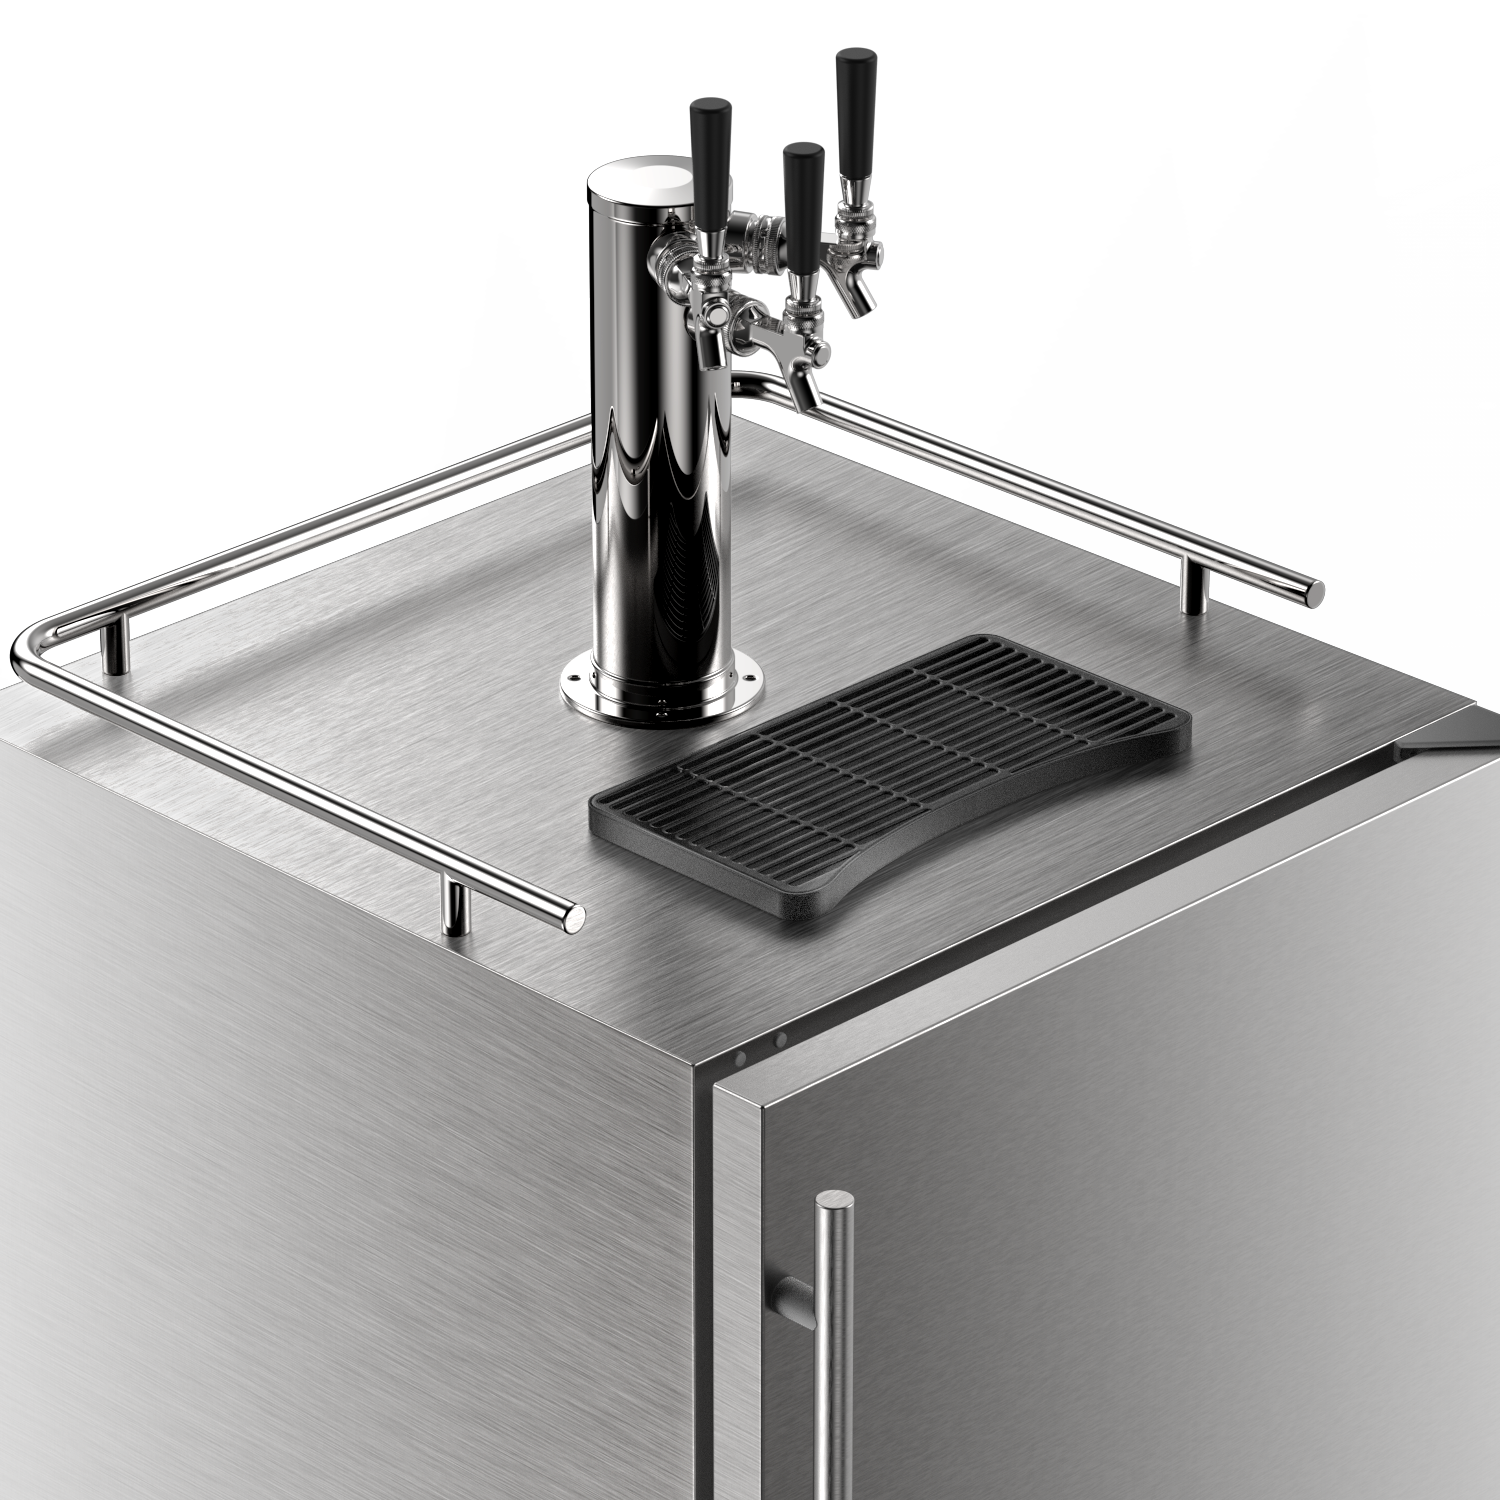 Close-up view of the tap tower and drip tray of the 6.04 Cu Ft Undercounter Kegerator Outdoor Beverage Fridge